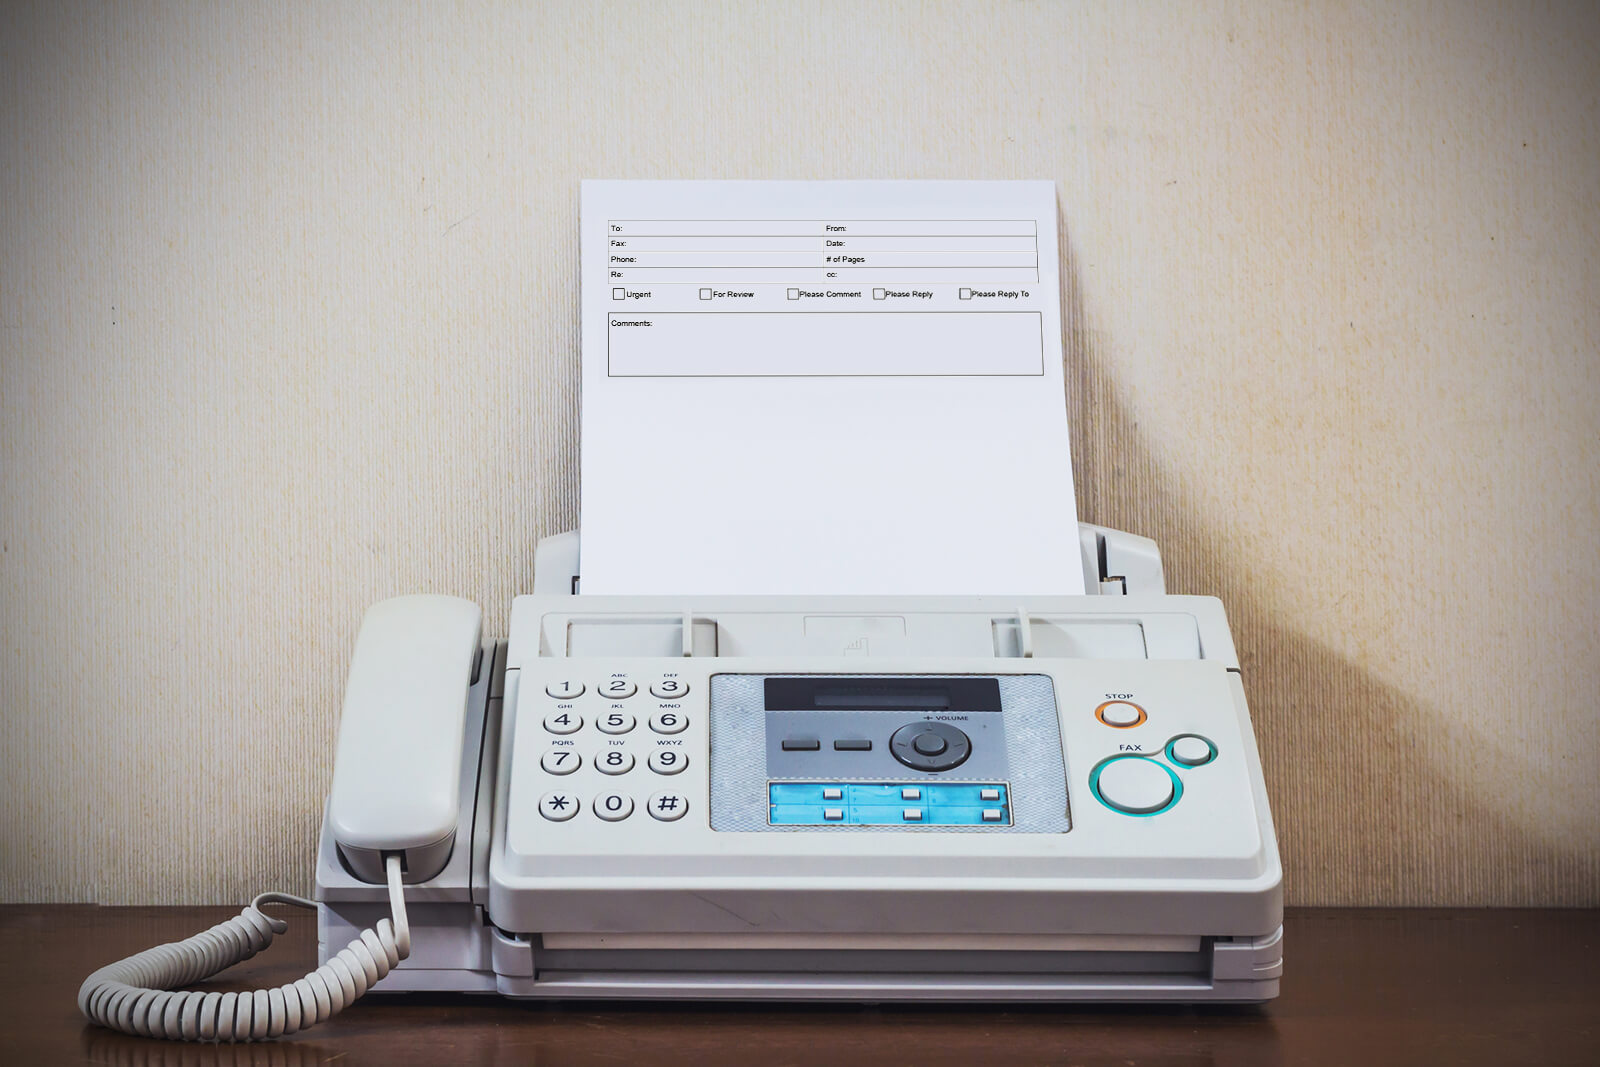 A fax cover sheet is a page that is sent to your recipient before your real fax message and is used to identify the sender, the intended recipient, the topic, and perhaps a few words describing the attached documents' content.